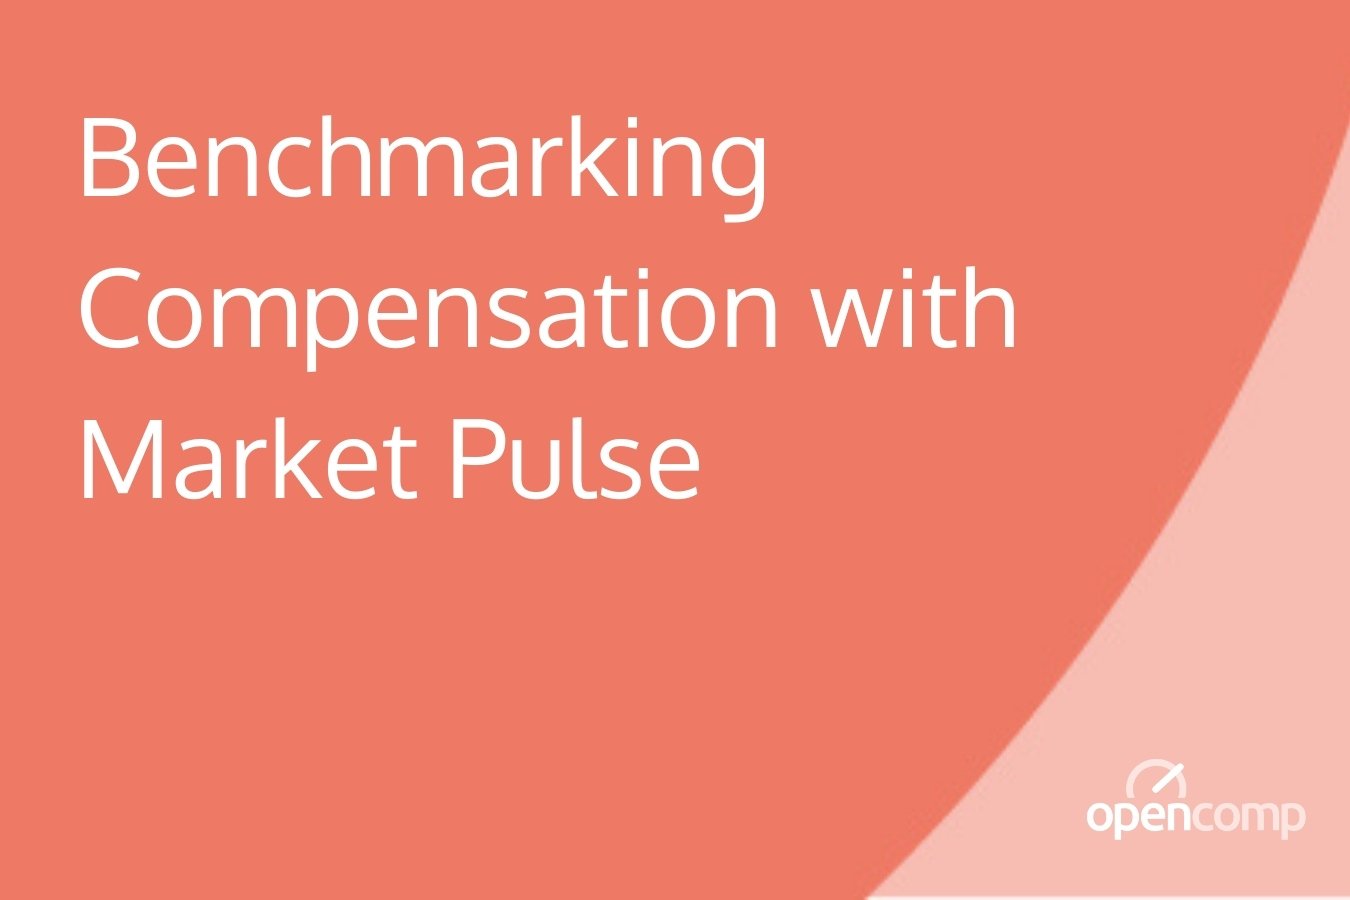 Benchmarking Compensation with Market Pulse